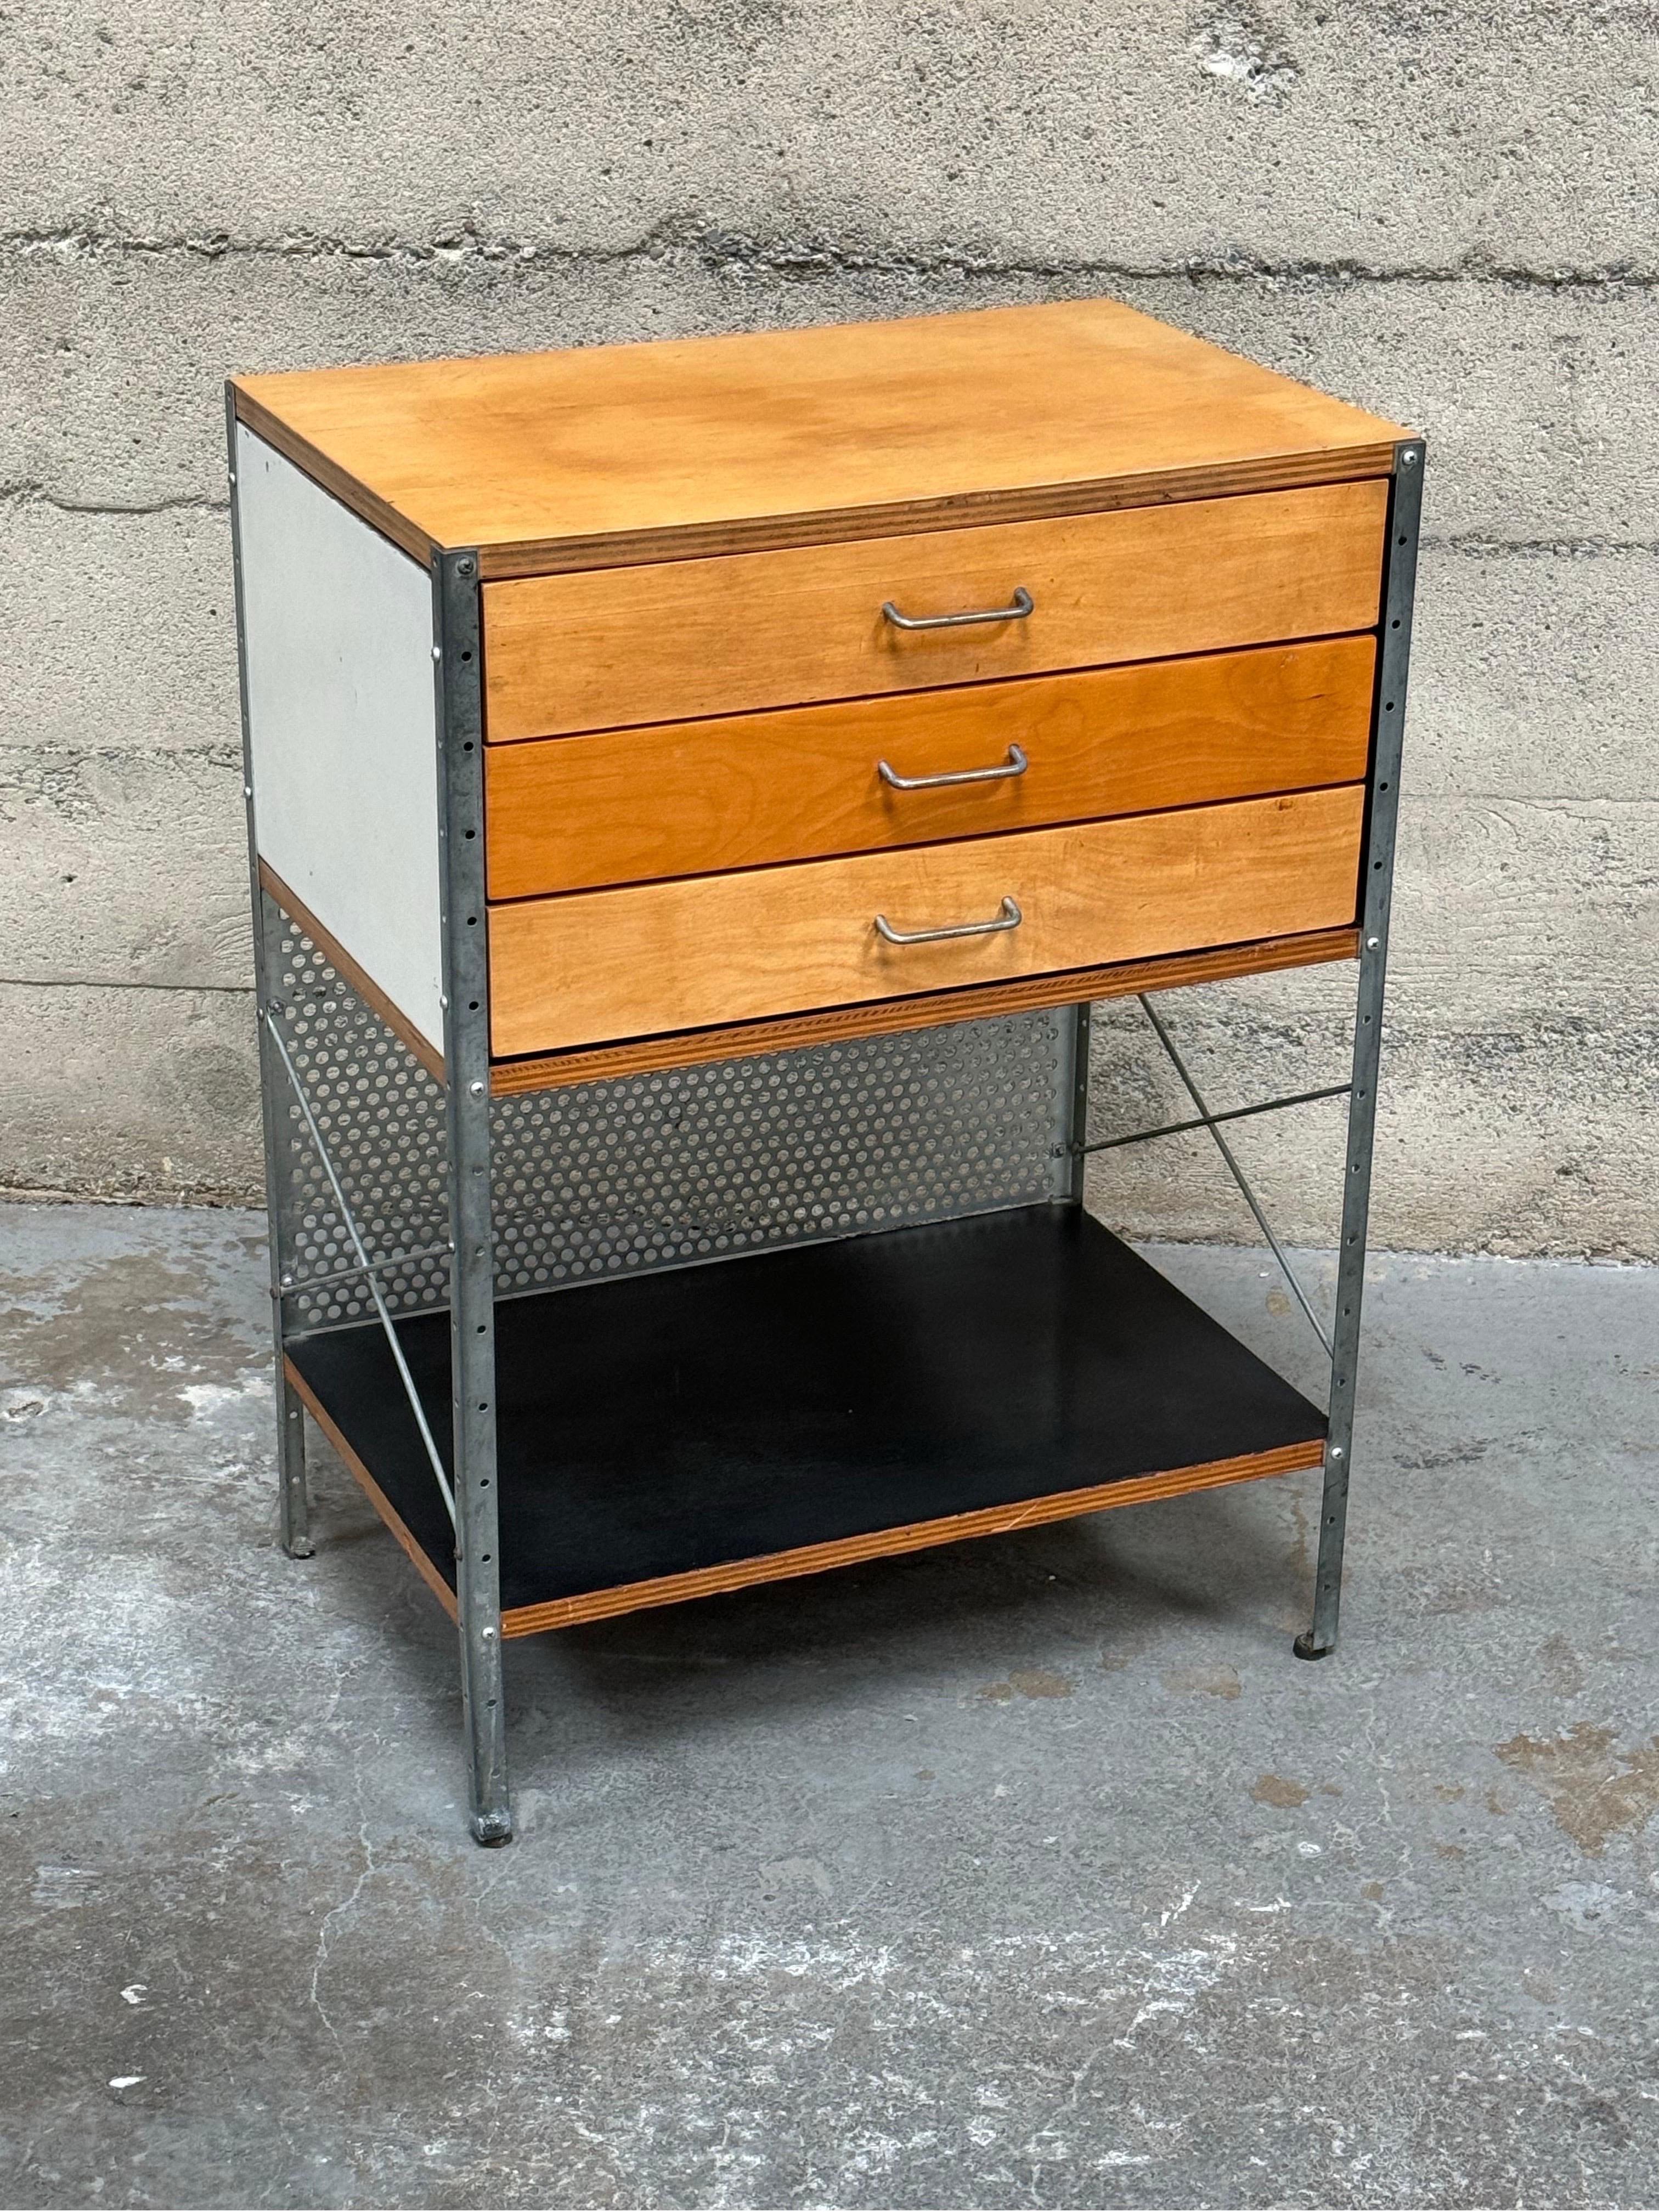 1st Generation Eames ESU (Eames Storage Unit) this is called the 270-N series. It's constructed of birch, plywood, lacquer and steel and has three pull drawers with a bottom shelf. The sides are colored panels in gray, white and black. The bottom